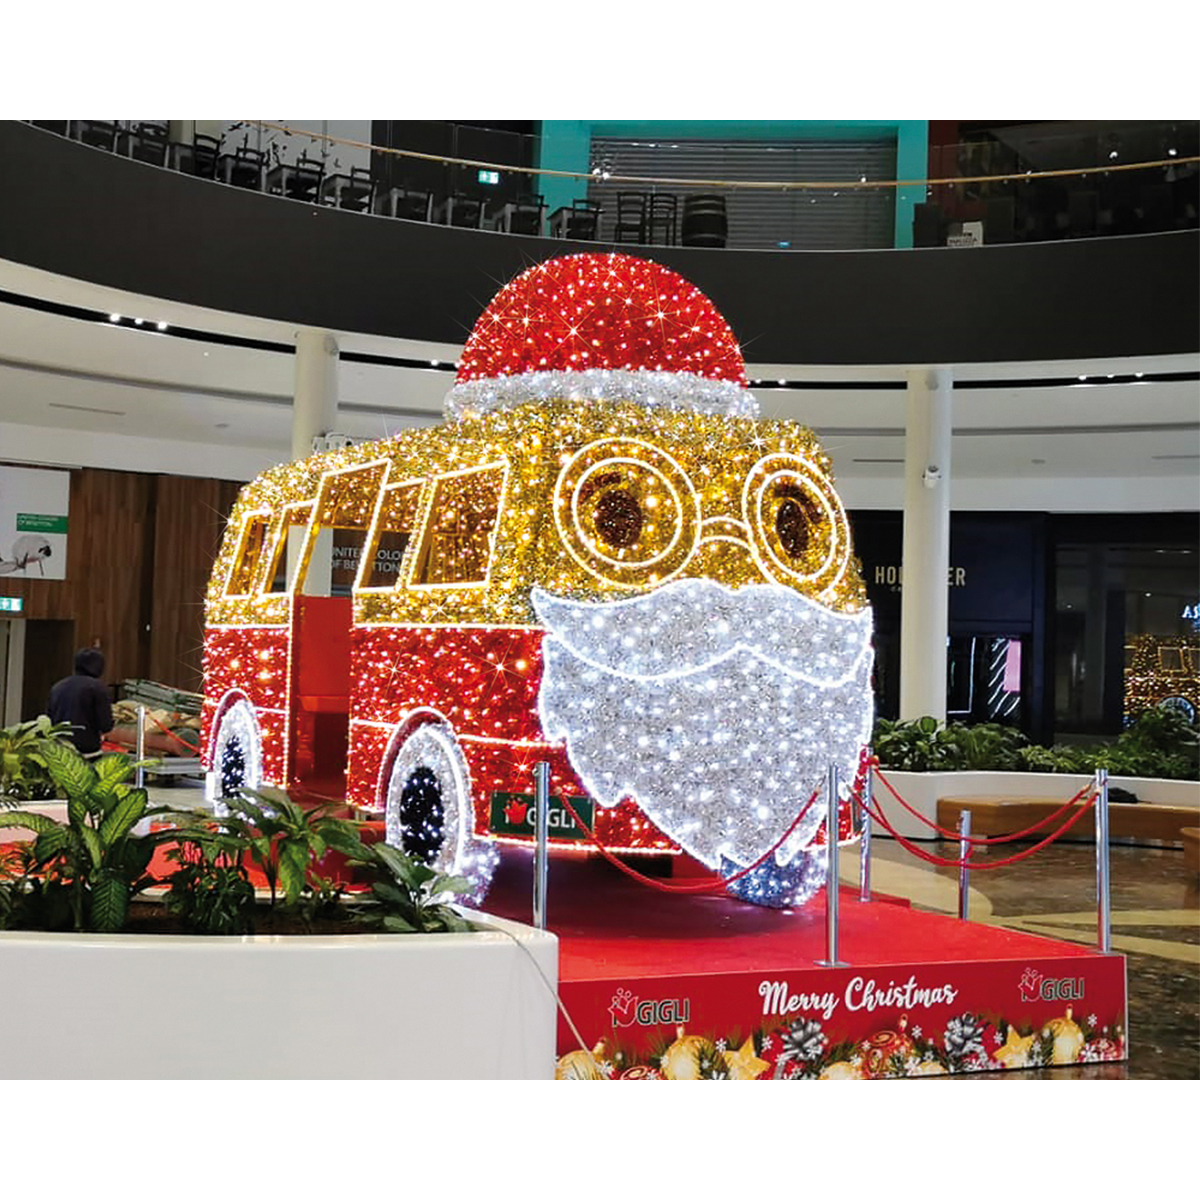 3D Deluxe Santa Van - Brilliantly Lit - Large Commercial Illuminated Display - 11.6ft tall